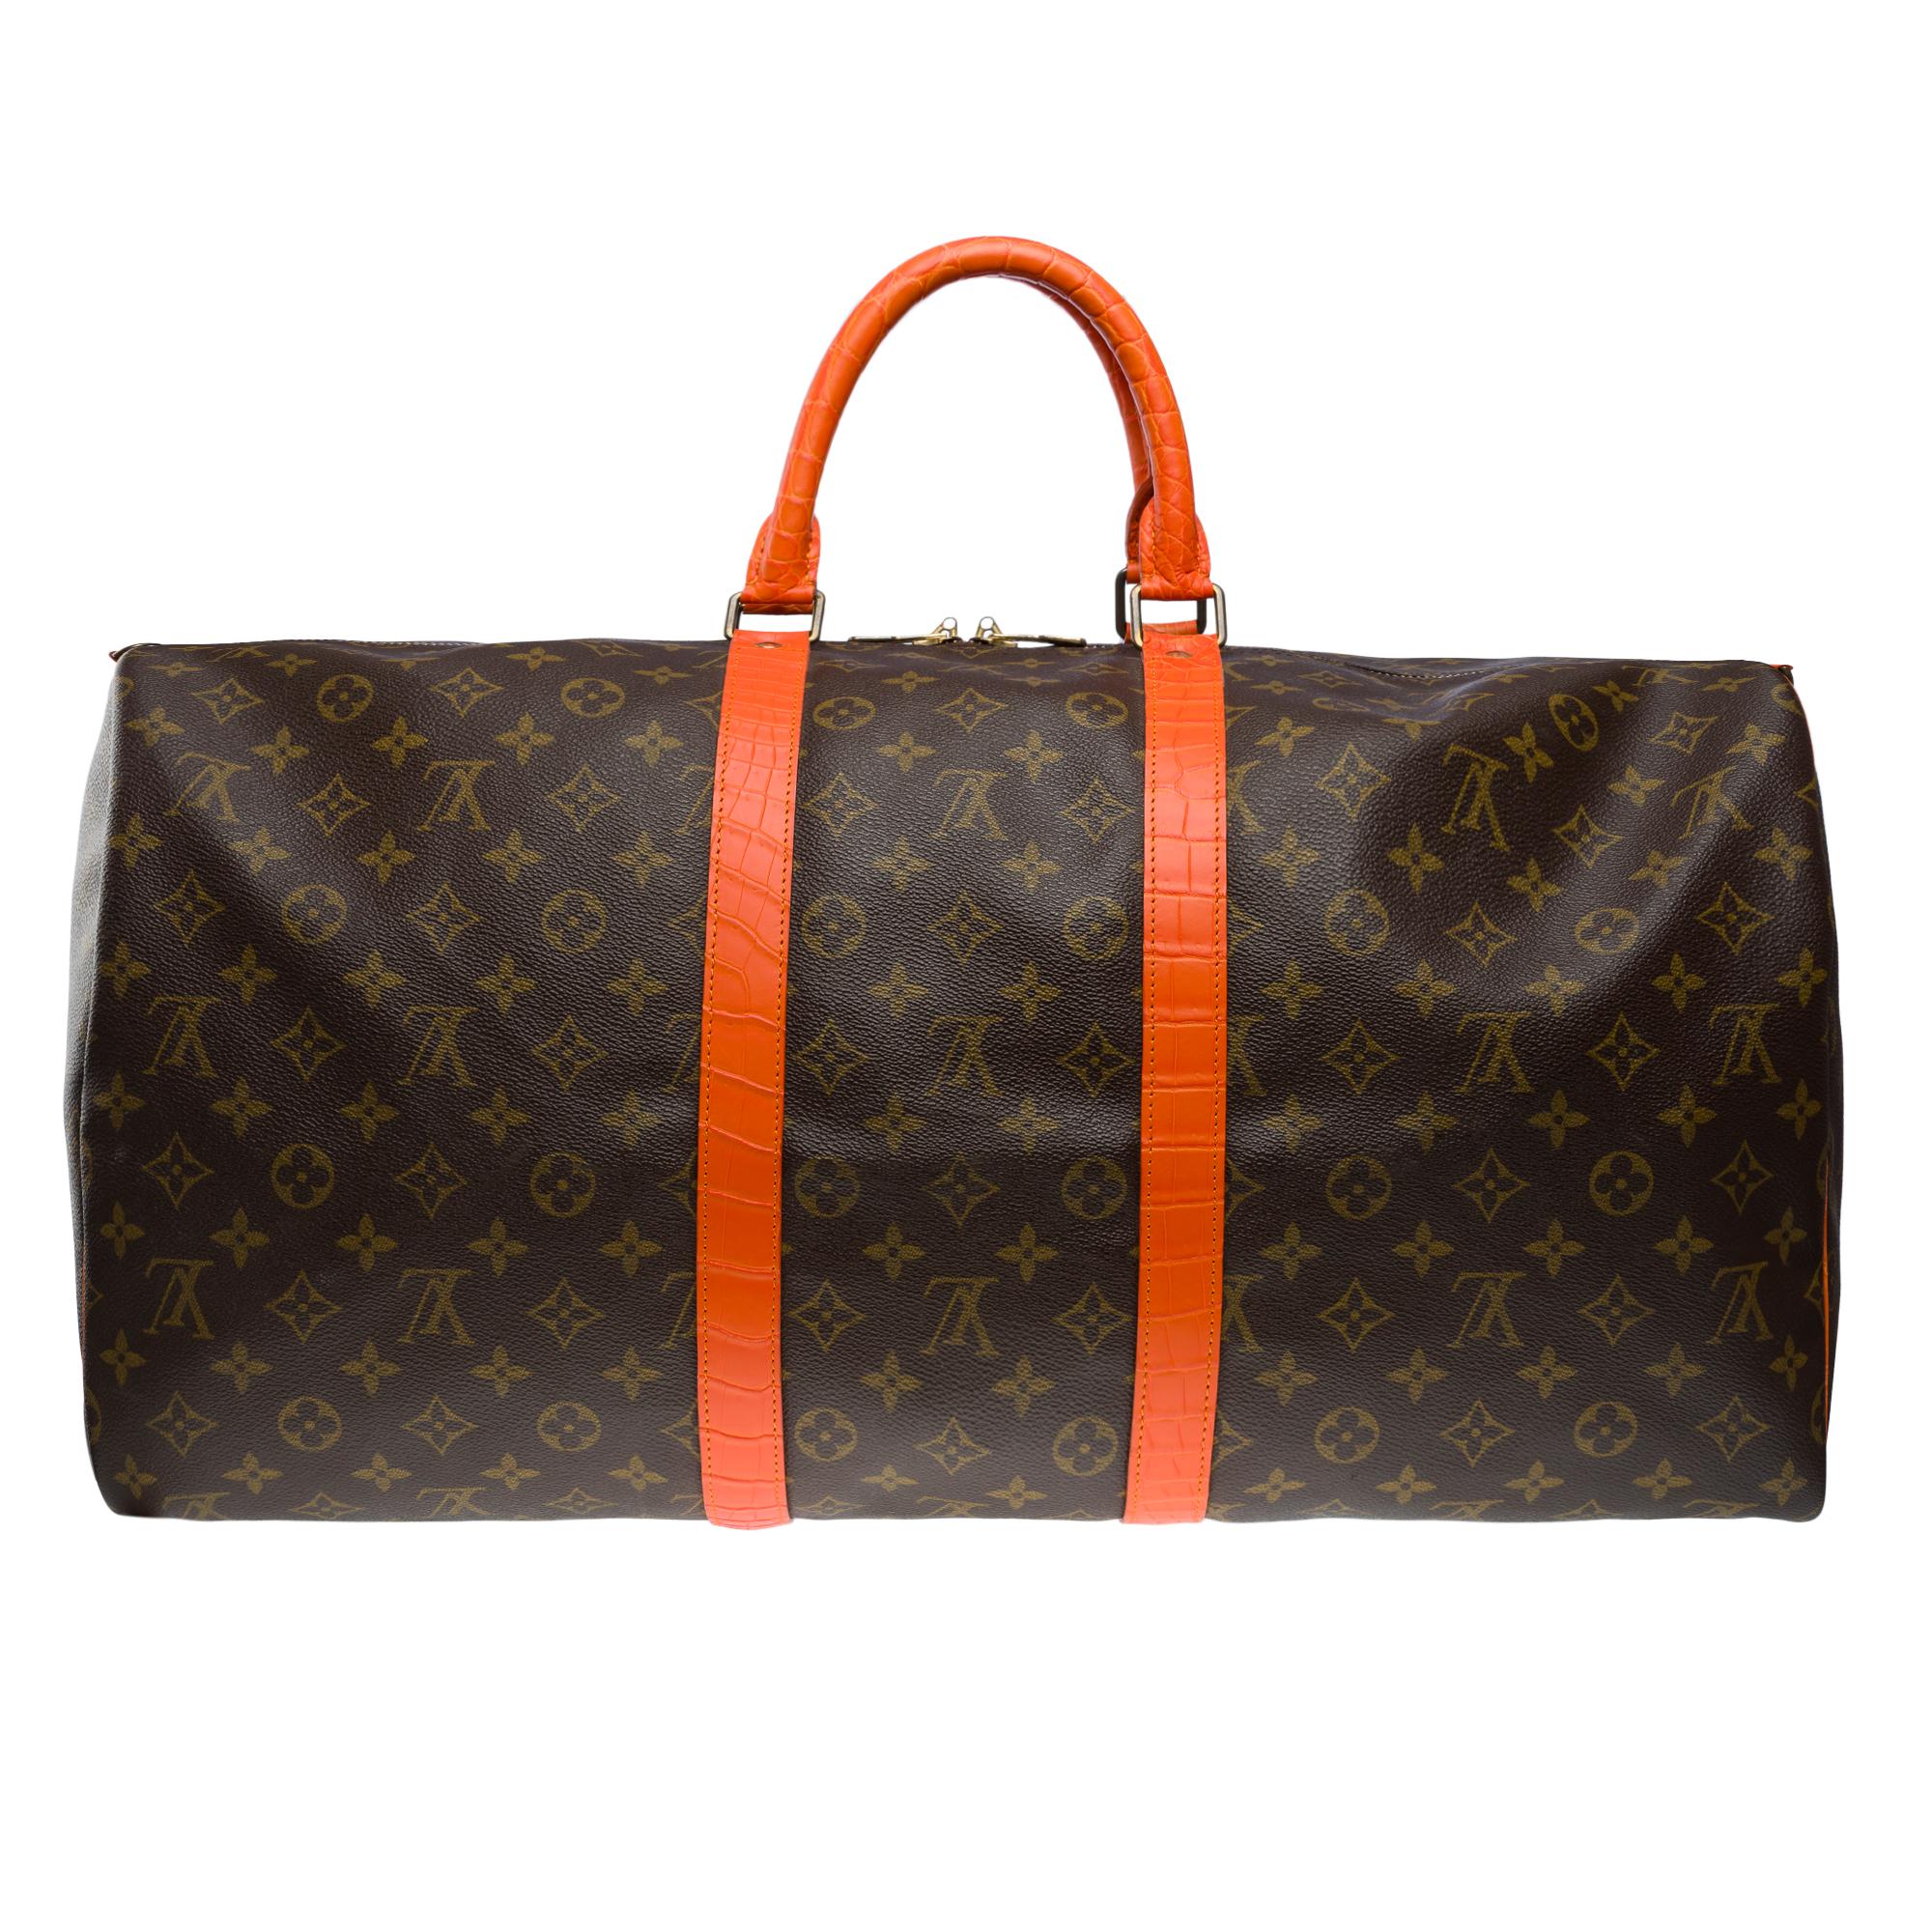 Customized Louis Vuitton Keepall 55 strap Travel bag with Orange Crocodile In Good Condition For Sale In Paris, IDF